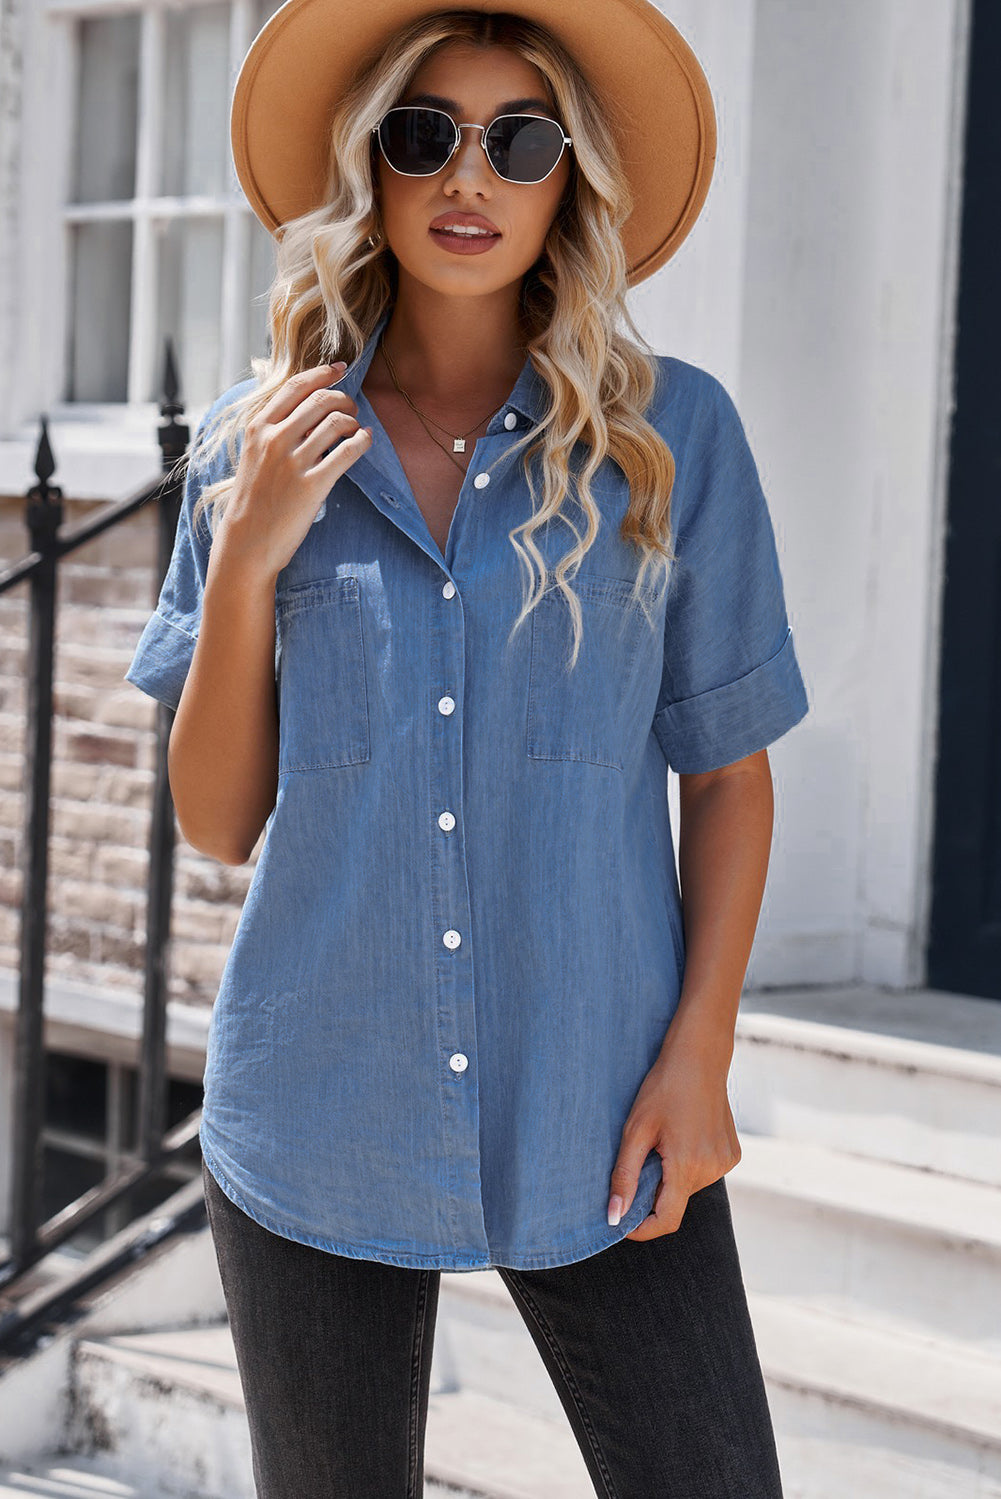 Alexis Button Front Collared Short Sleeve Shirt- 1 size Small/Dusty Blue left! FINAL SALE!